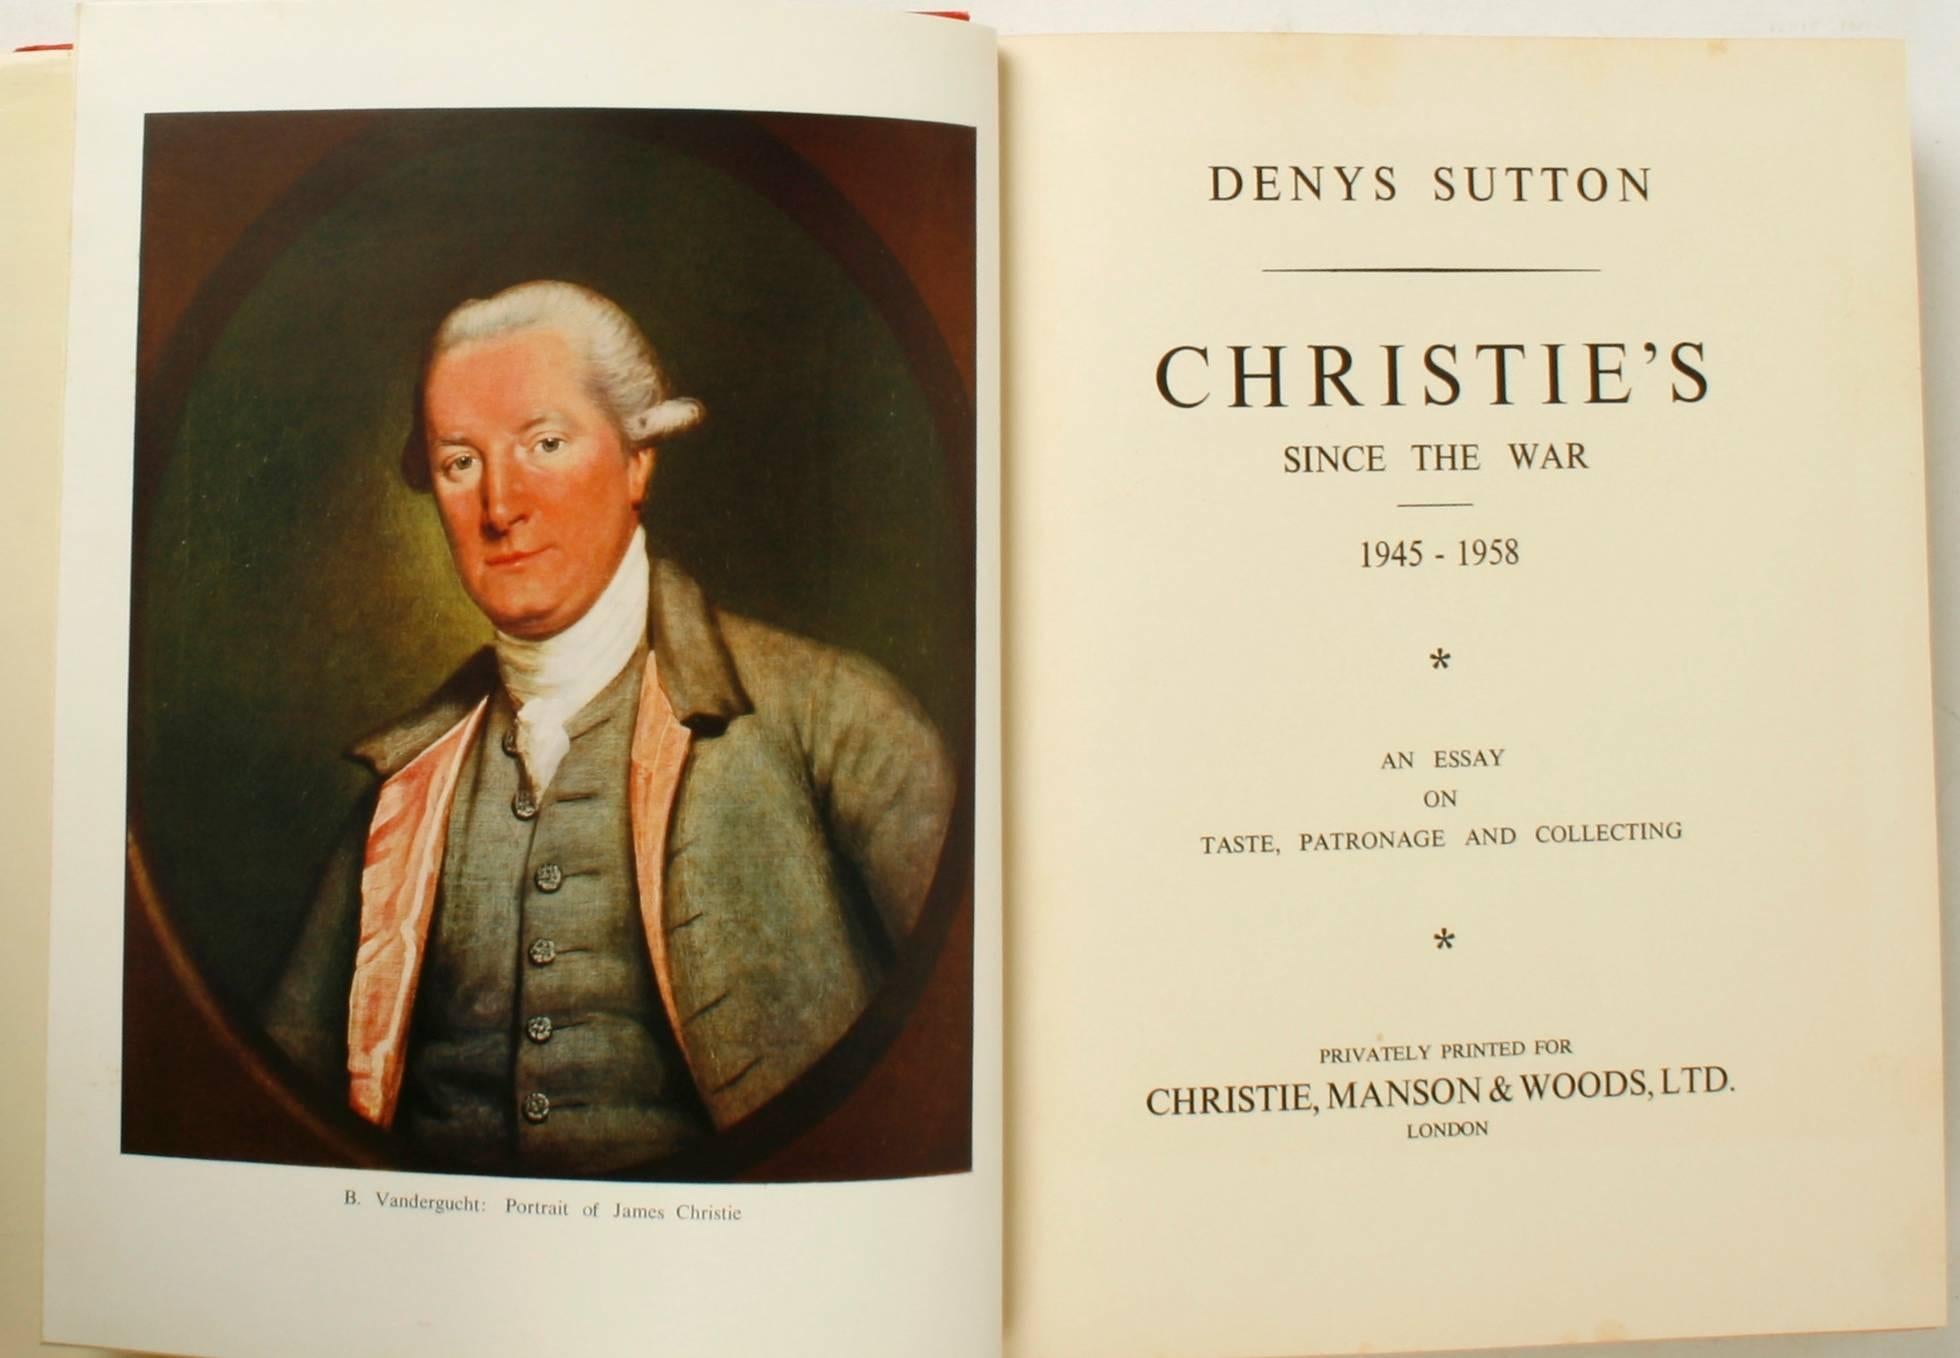 Christie's Since the War, 1945-1958: An Essay on Taste, Patronage and Collecting, by Denys Sutton. London: Christie, Manson and Woods, Inc., 1959. First Edition hardcover with dust jacket. 168 pp. An essay accompanied by many beautiful illustrations